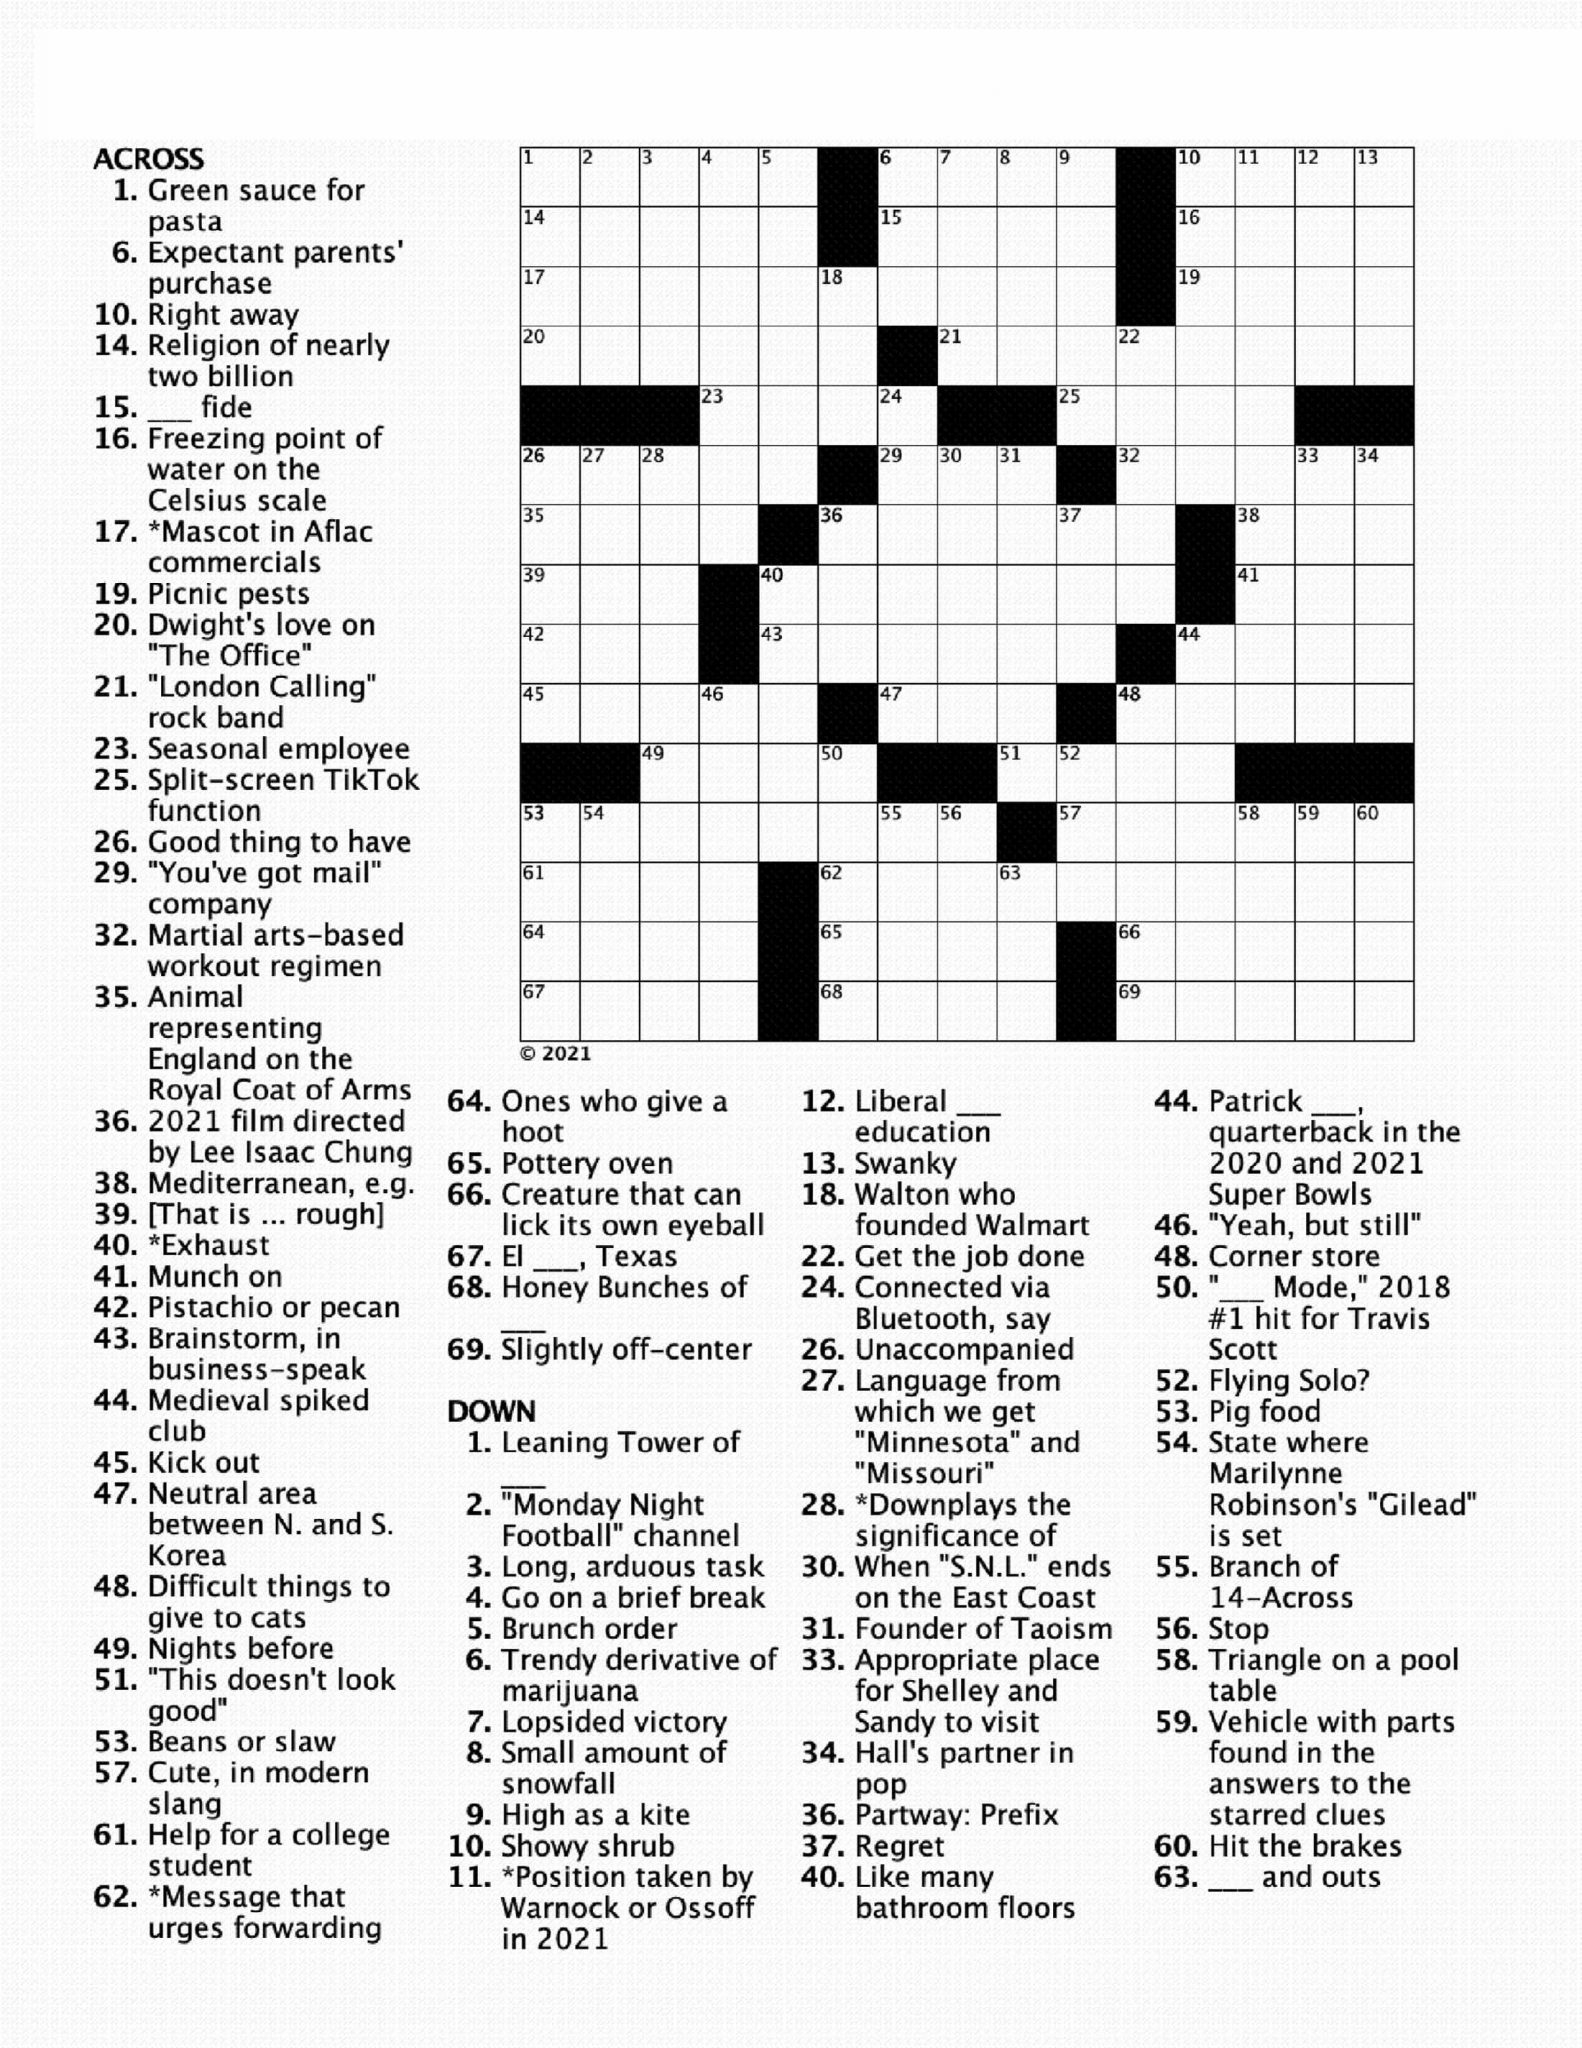 he became the znew york times crossword editor in 1993